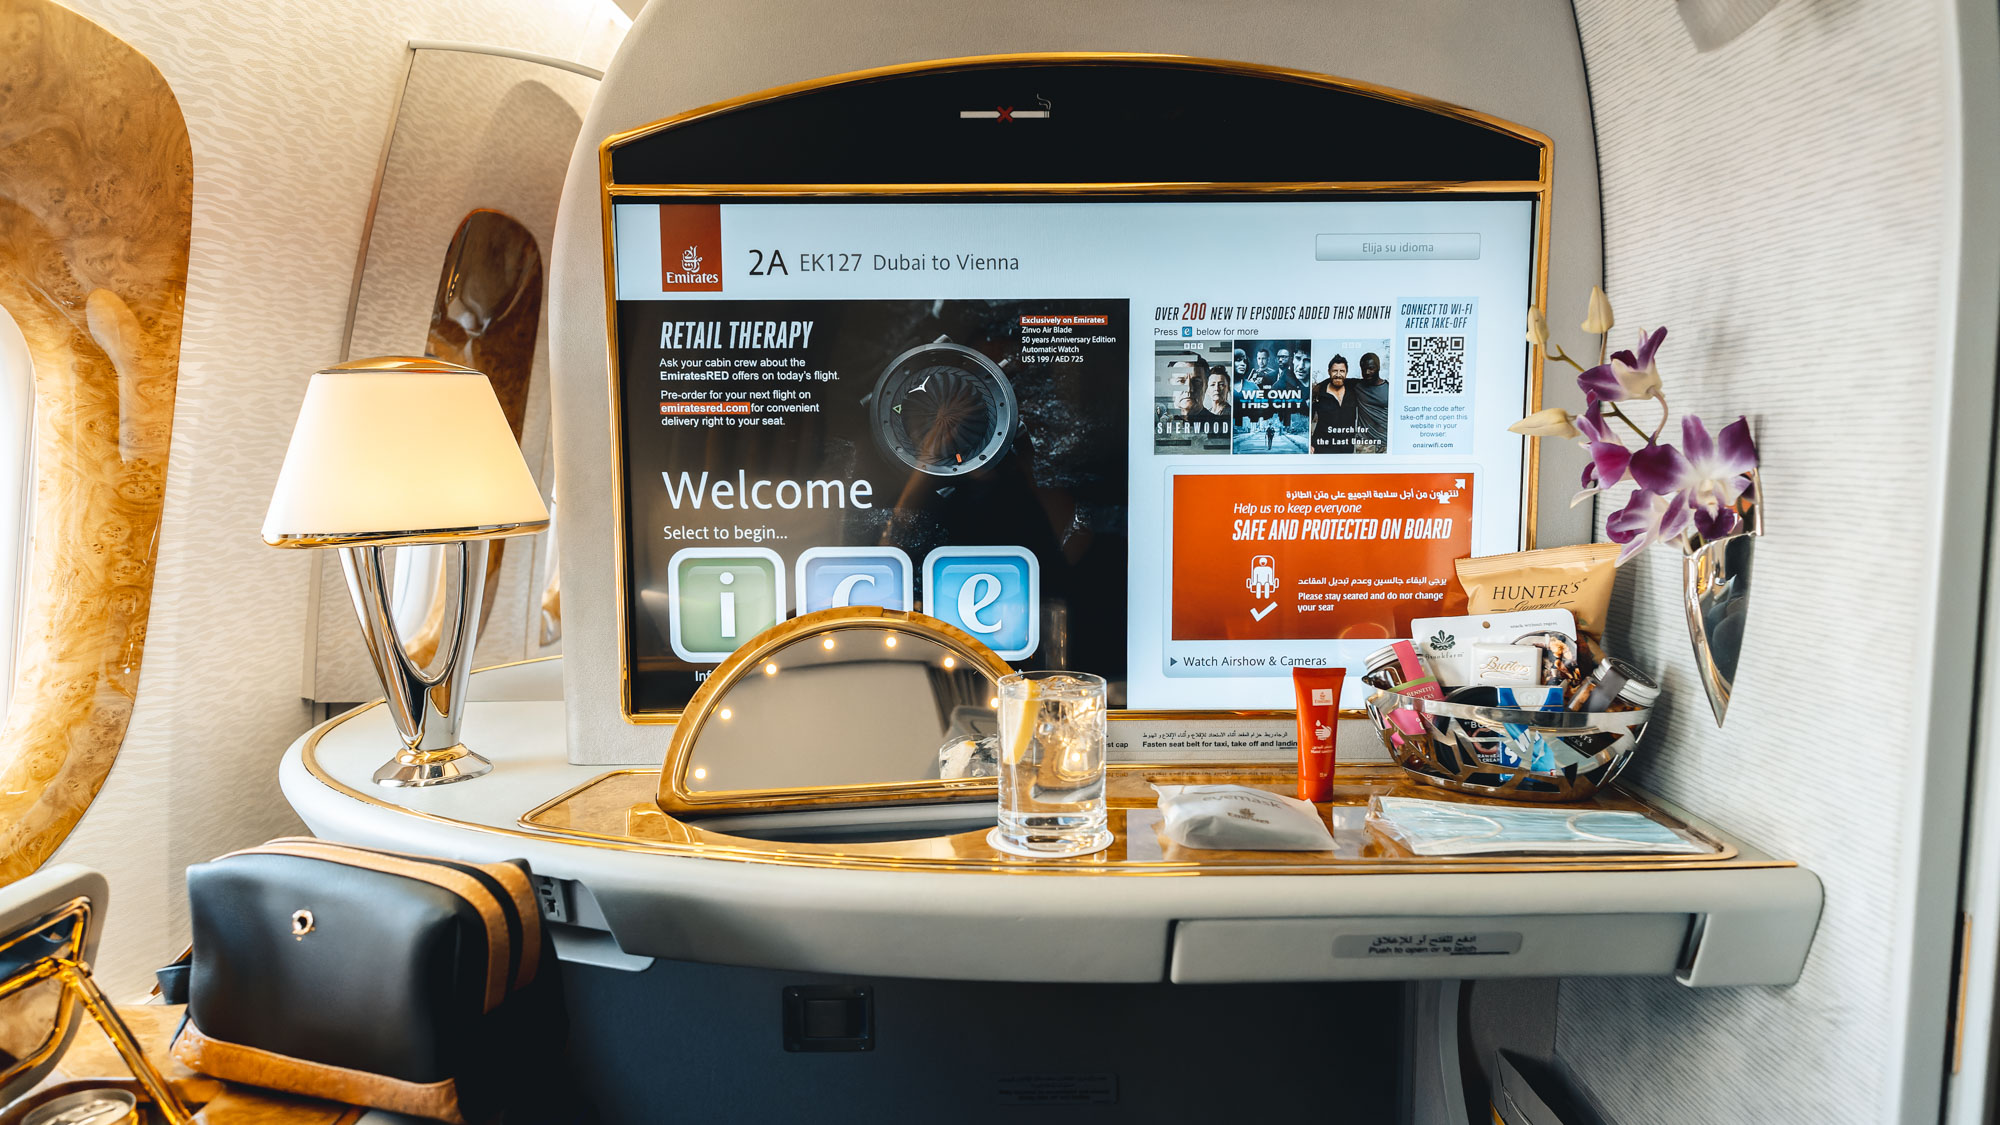 Emirates Boeing 777 First Class suite